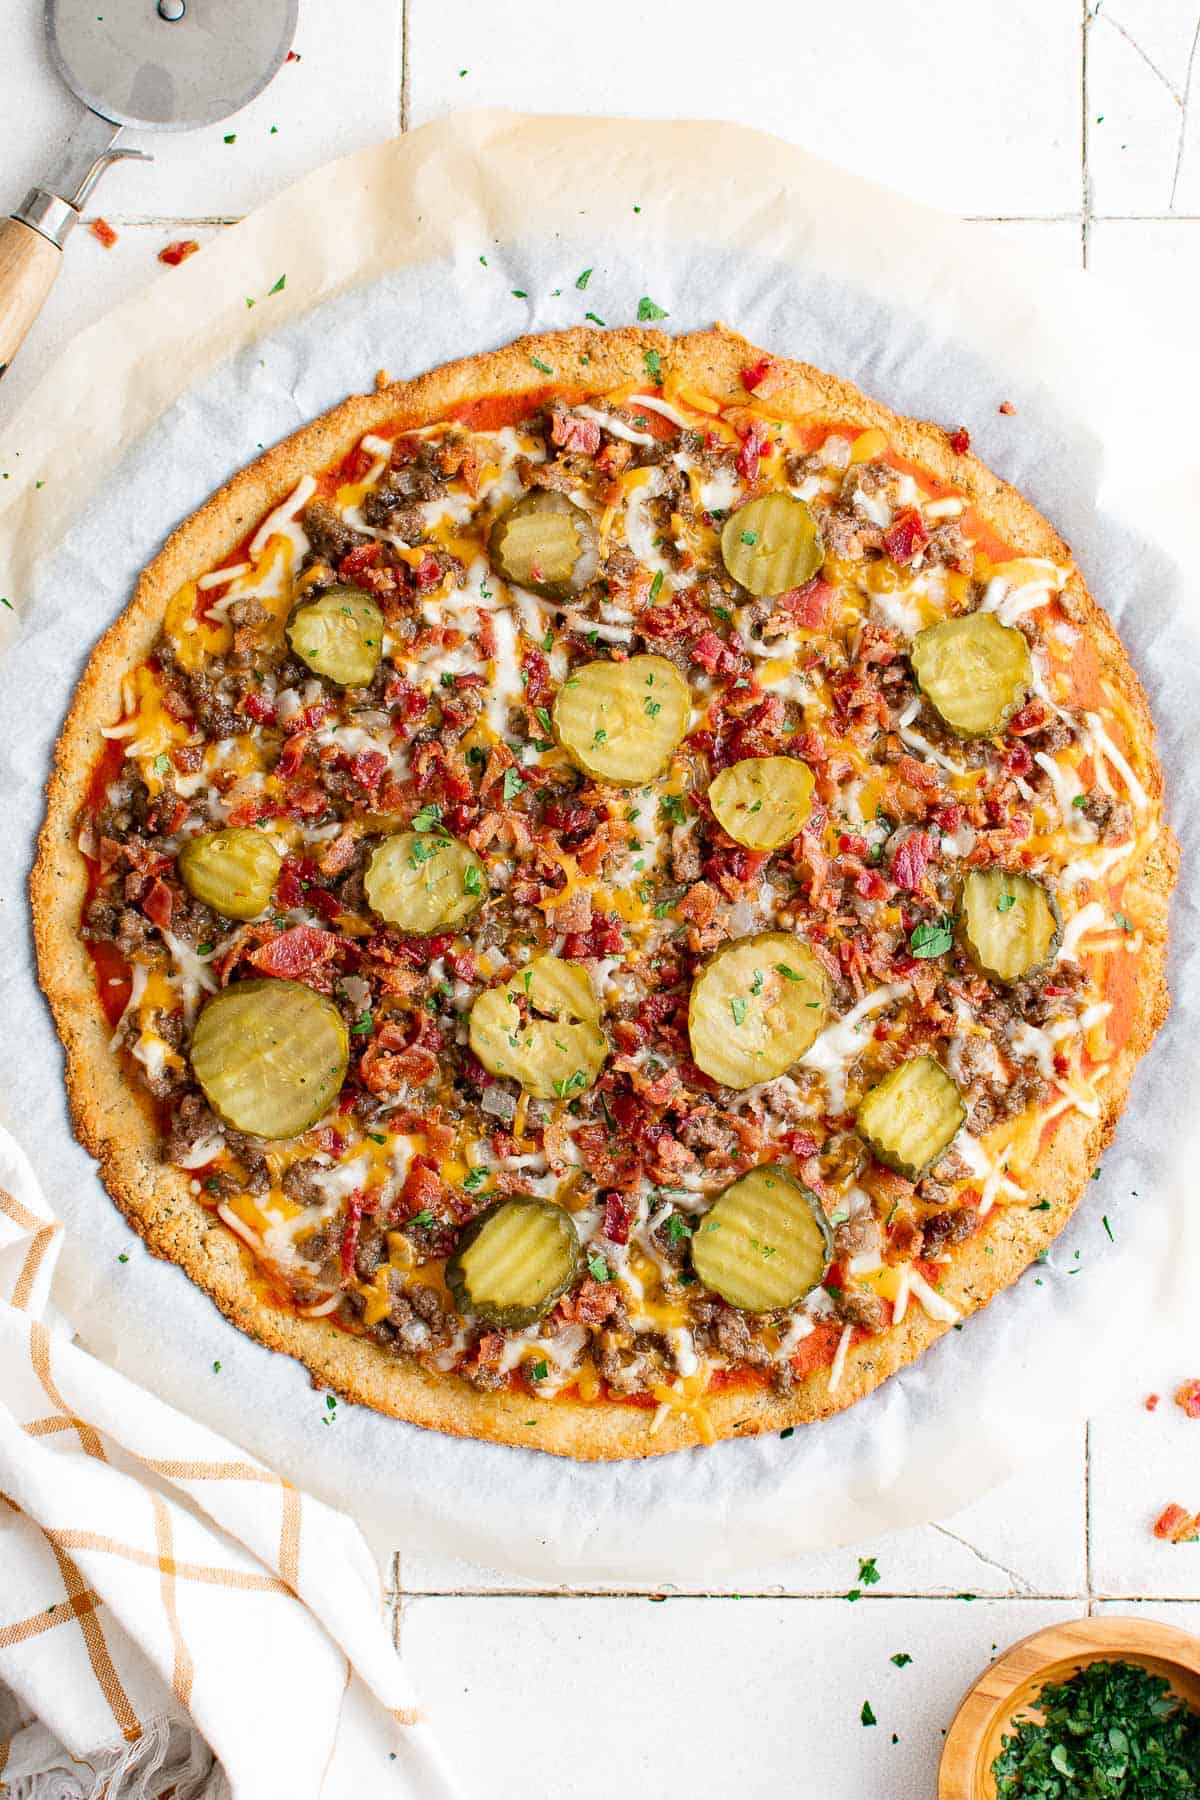 a keto bacon cheeseburger pizza with ground beef, bacon, cheese, pickles, onion and garlic